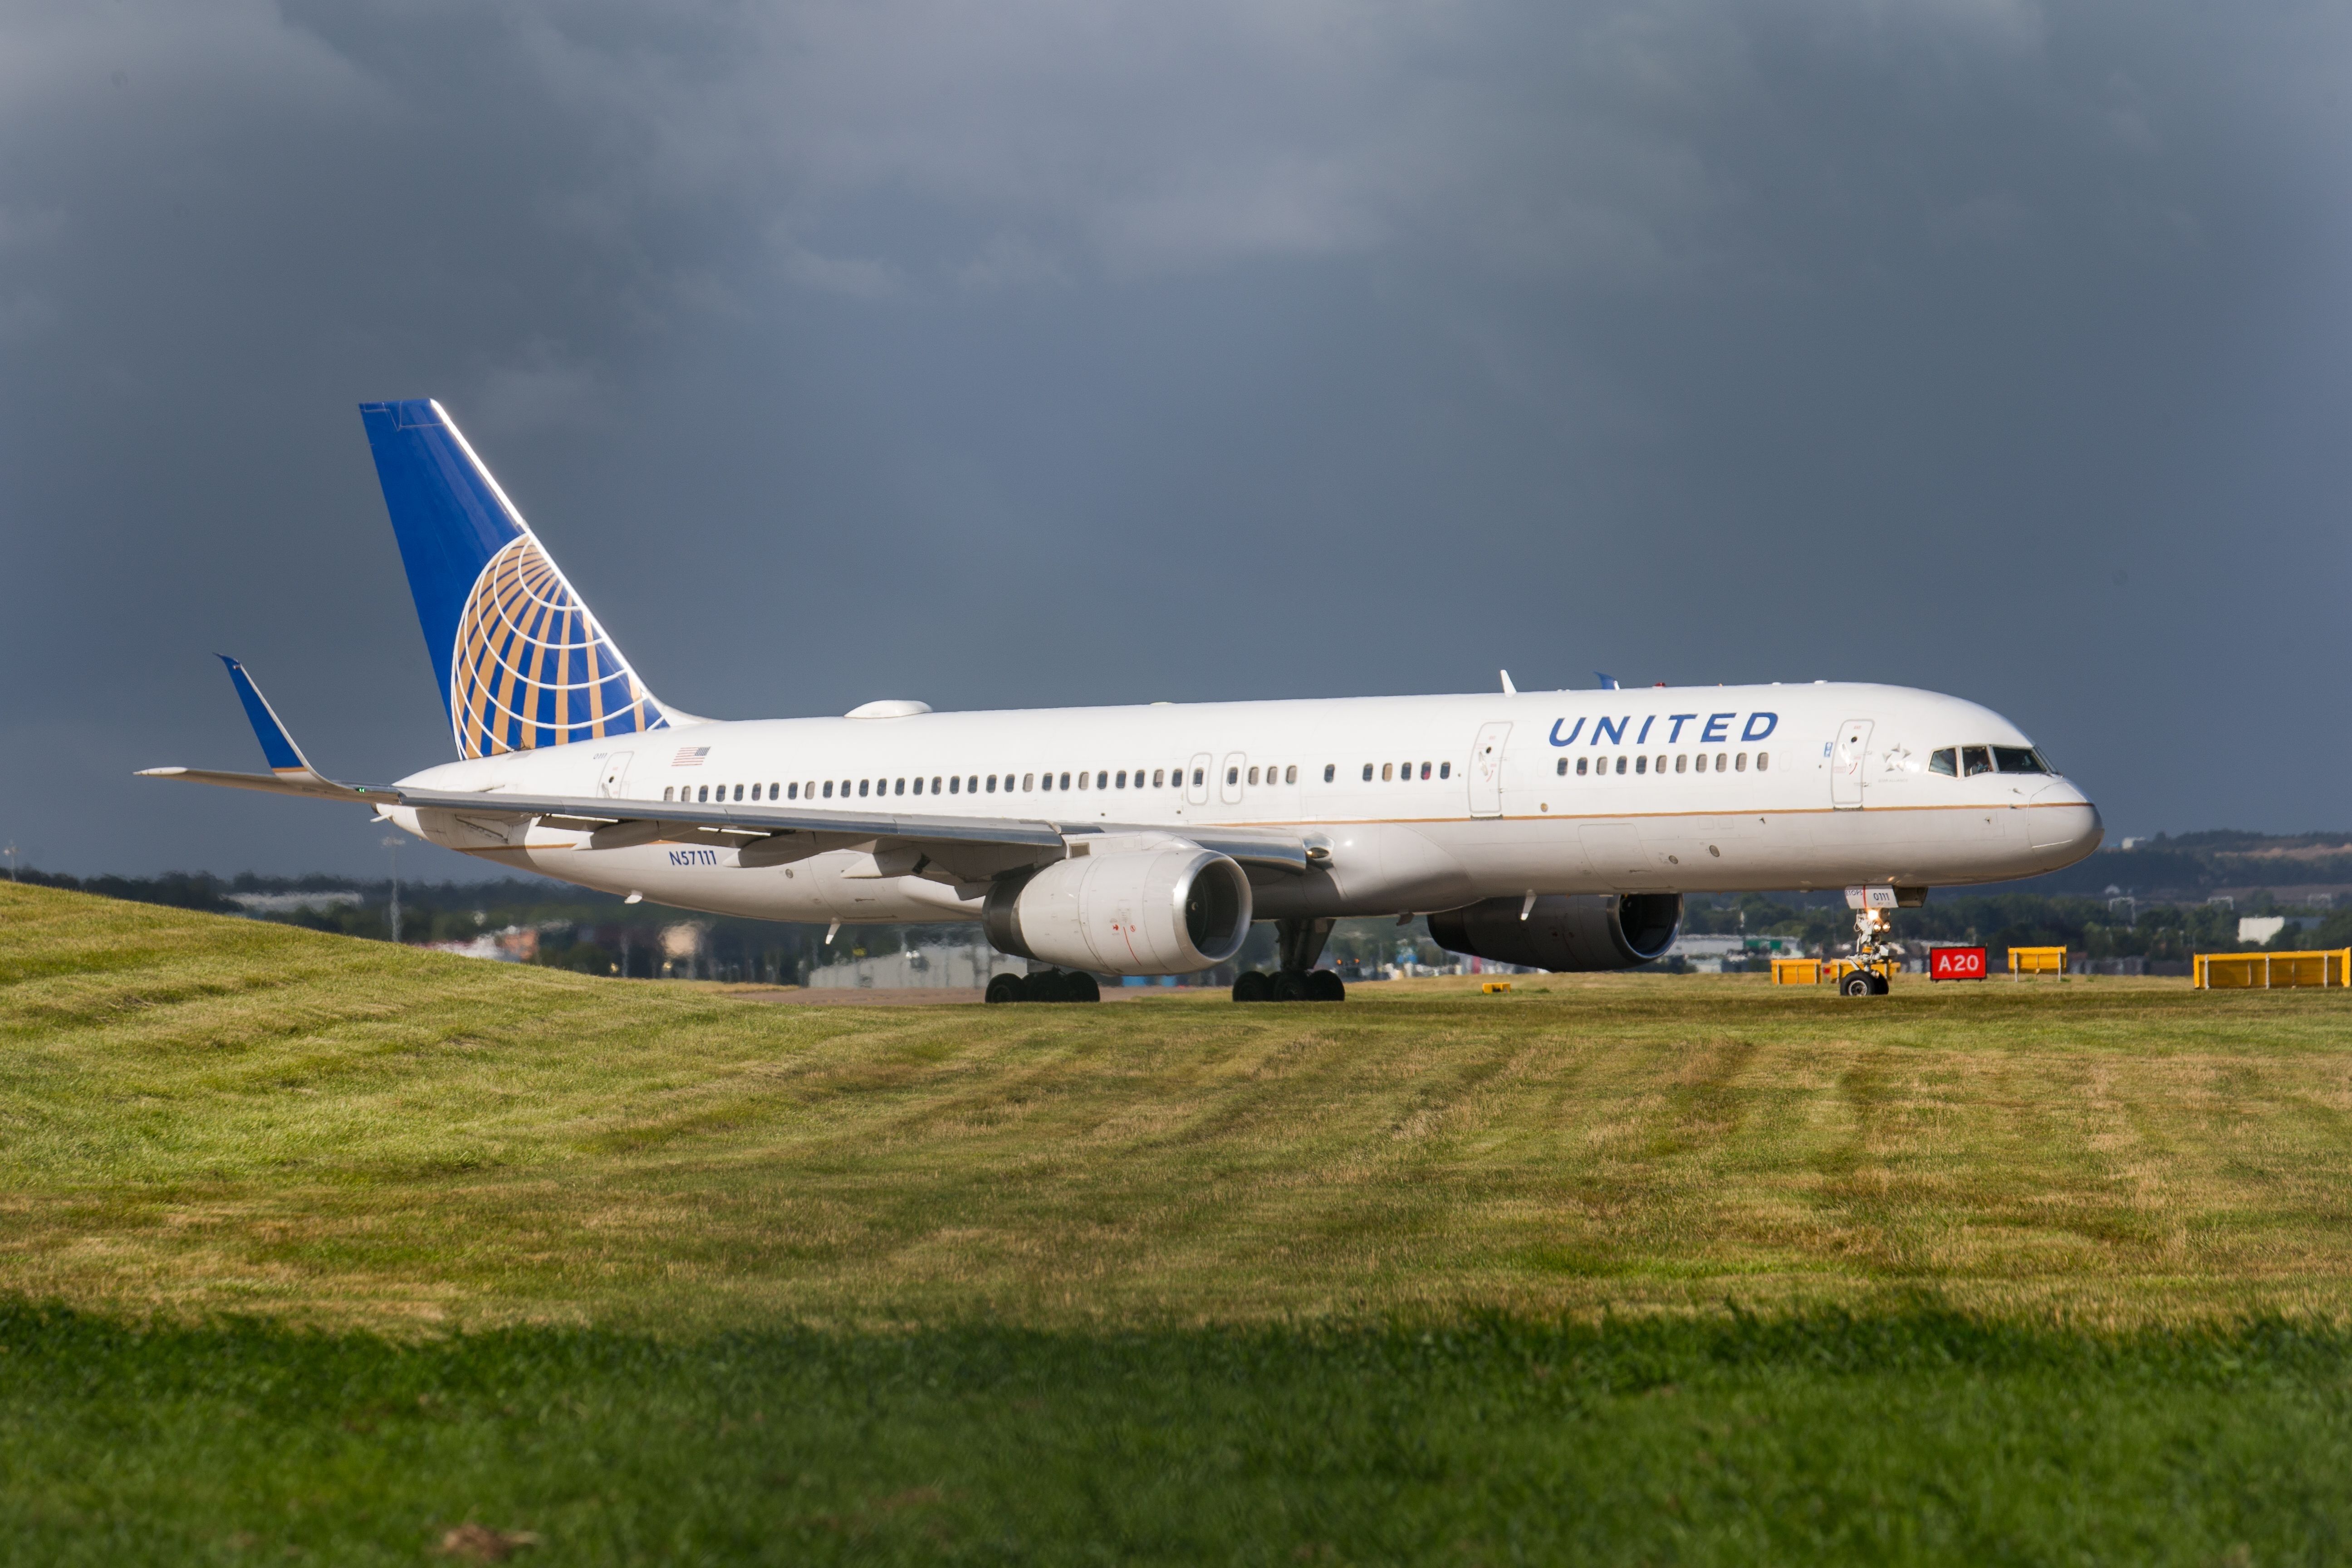 A United Airlines Boeing 757 at an airport